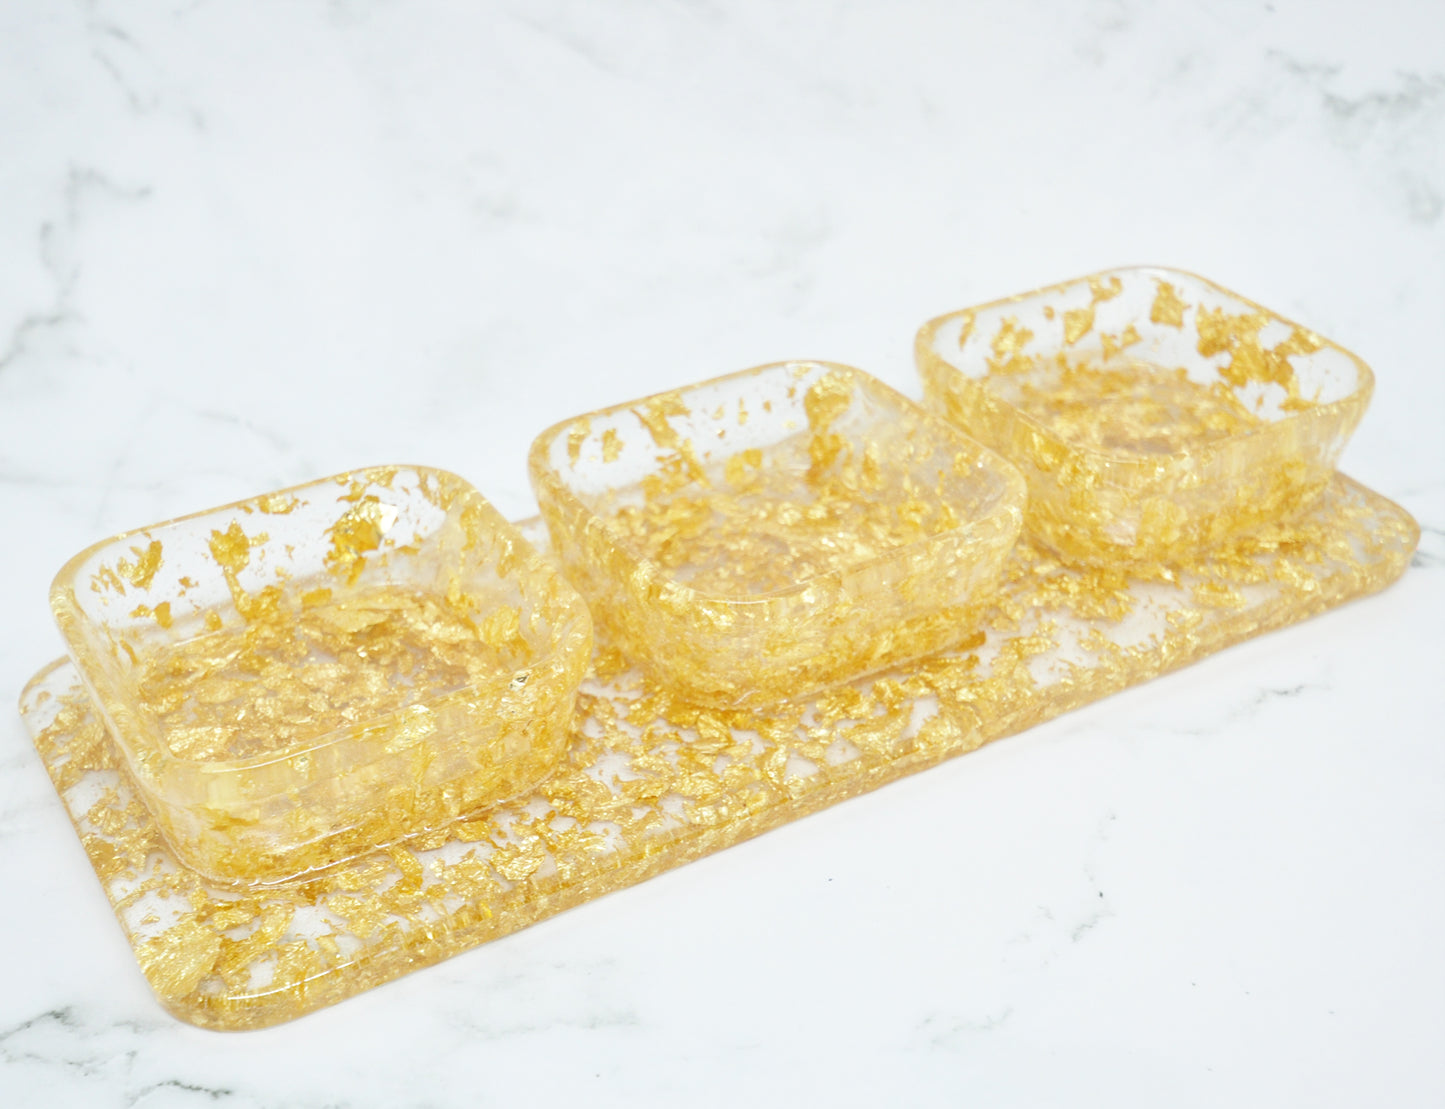 Gold Trinket Vanity Tray - The perfect accessory to any room.